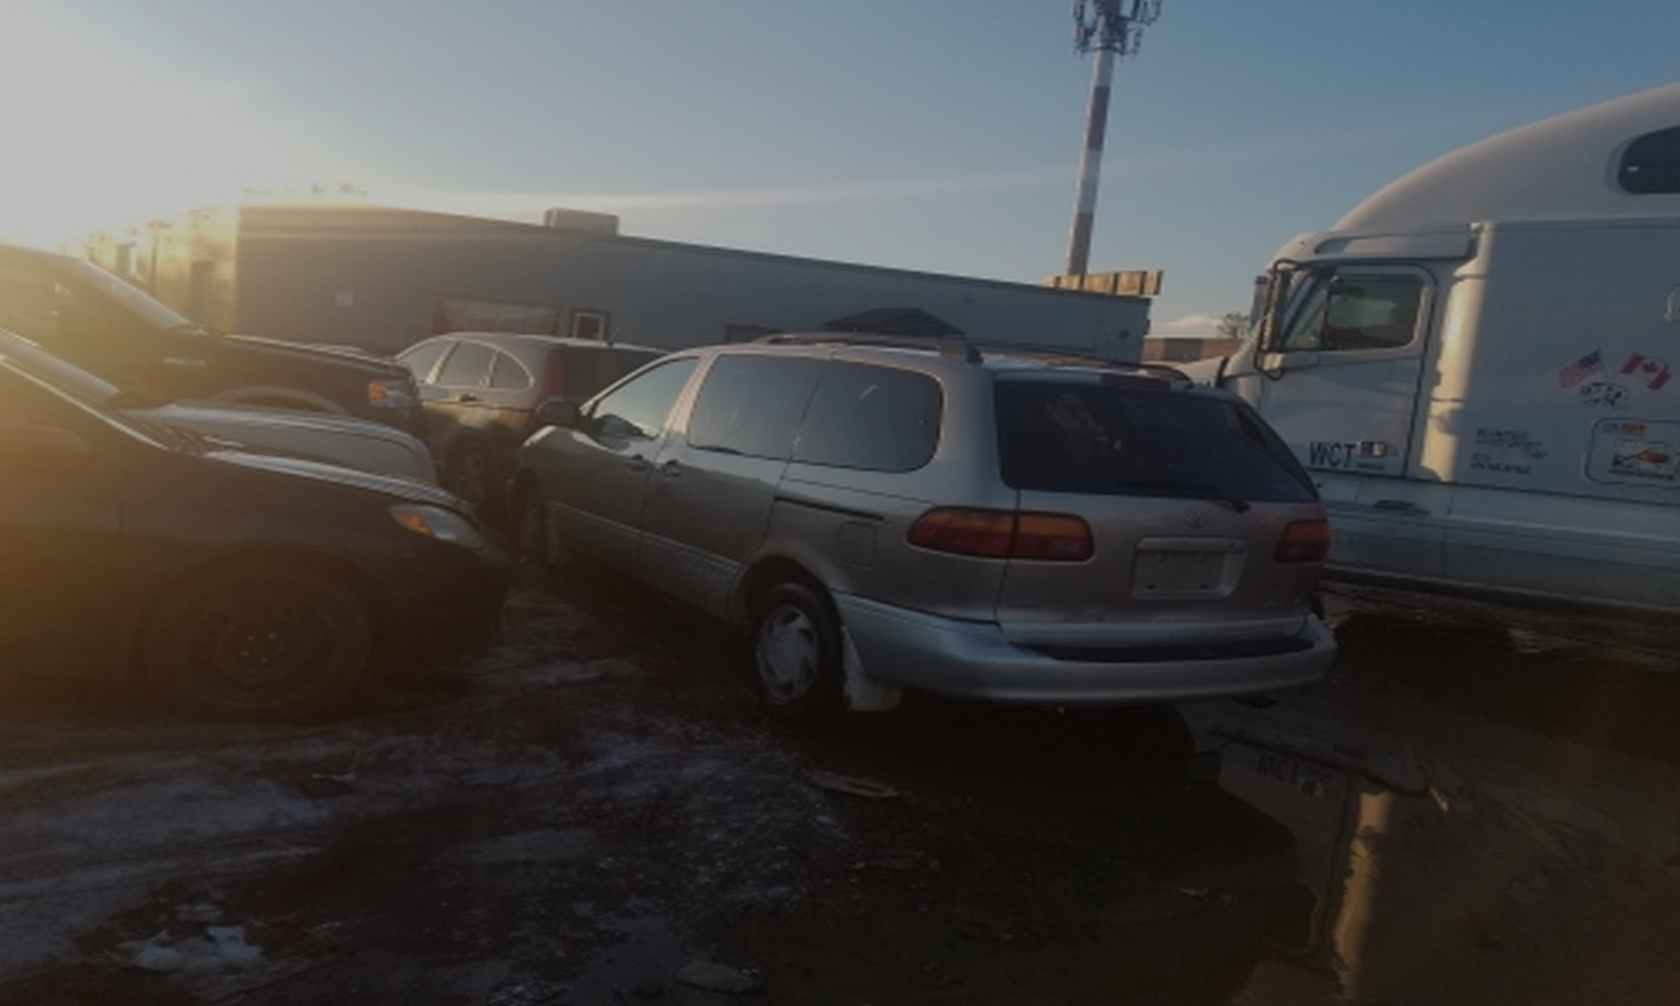 Some cars collected through Scrap Car Removal in Brampton